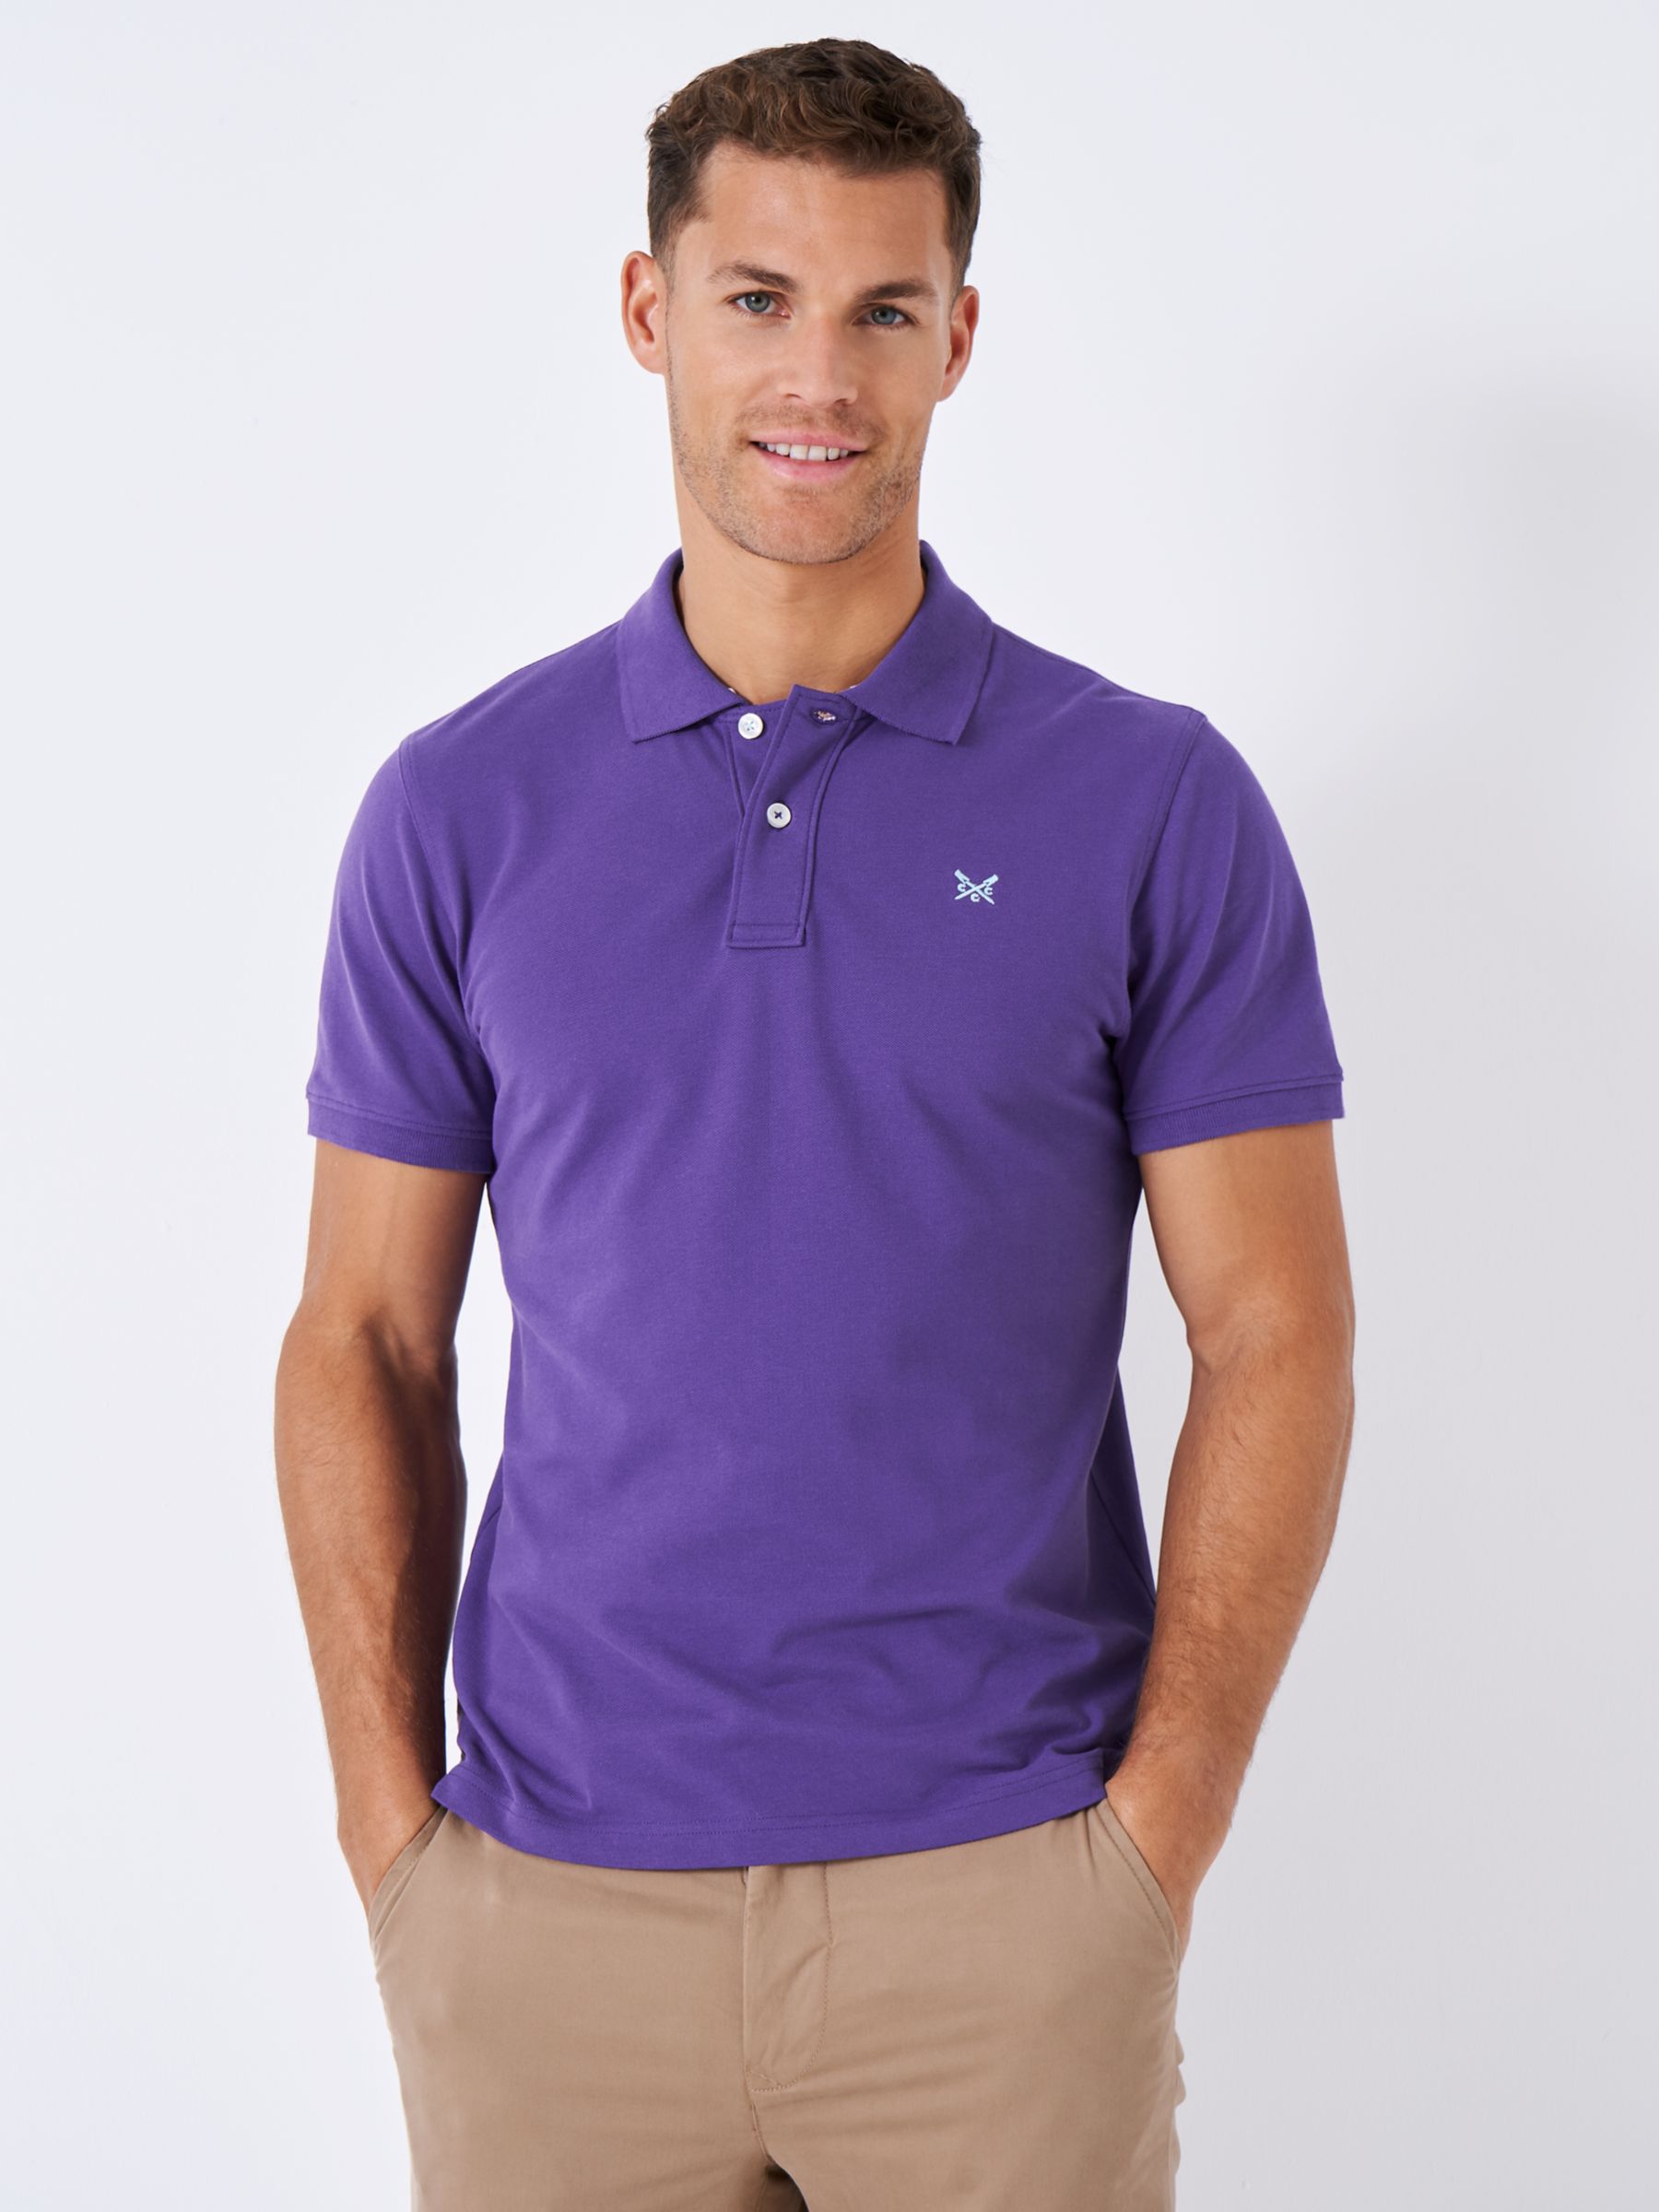 Men's Purple Polo & Rugby Shirts | John Lewis & Partners